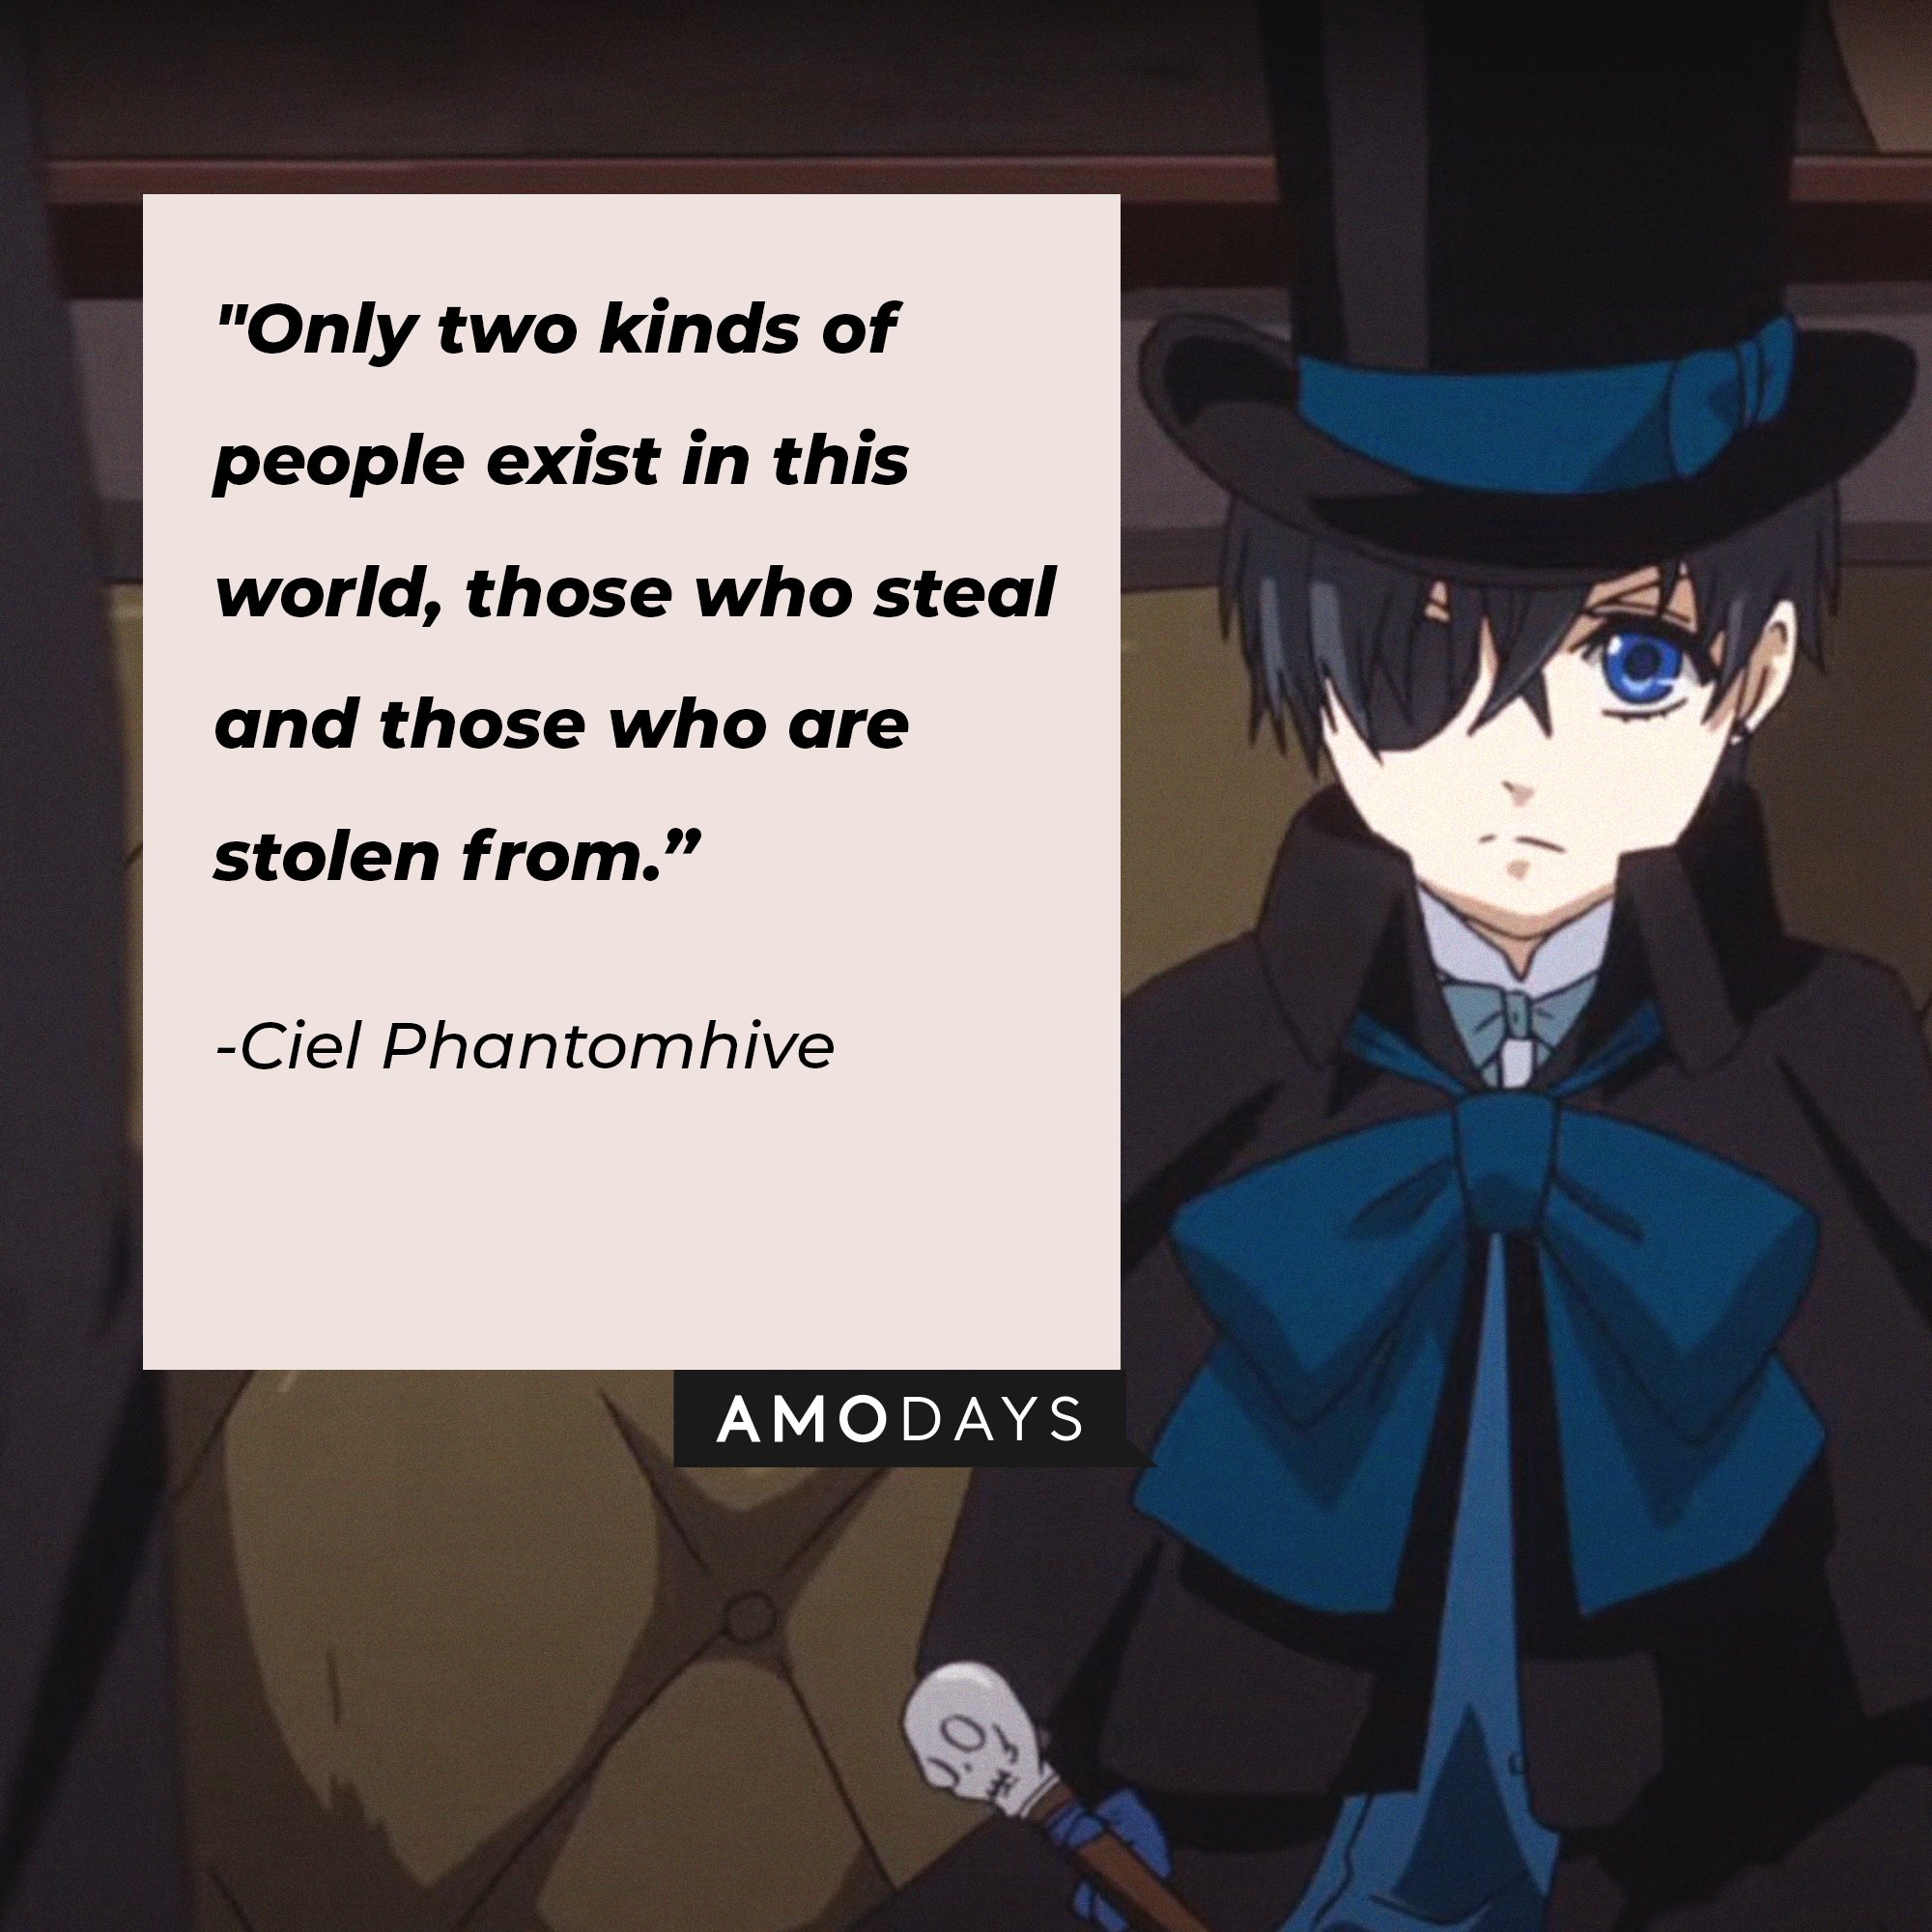  Ciel Phantomhive’s quote: "Only two kinds of people exist in this world, those who steal and those who are stolen from.” | Image: AmoDays